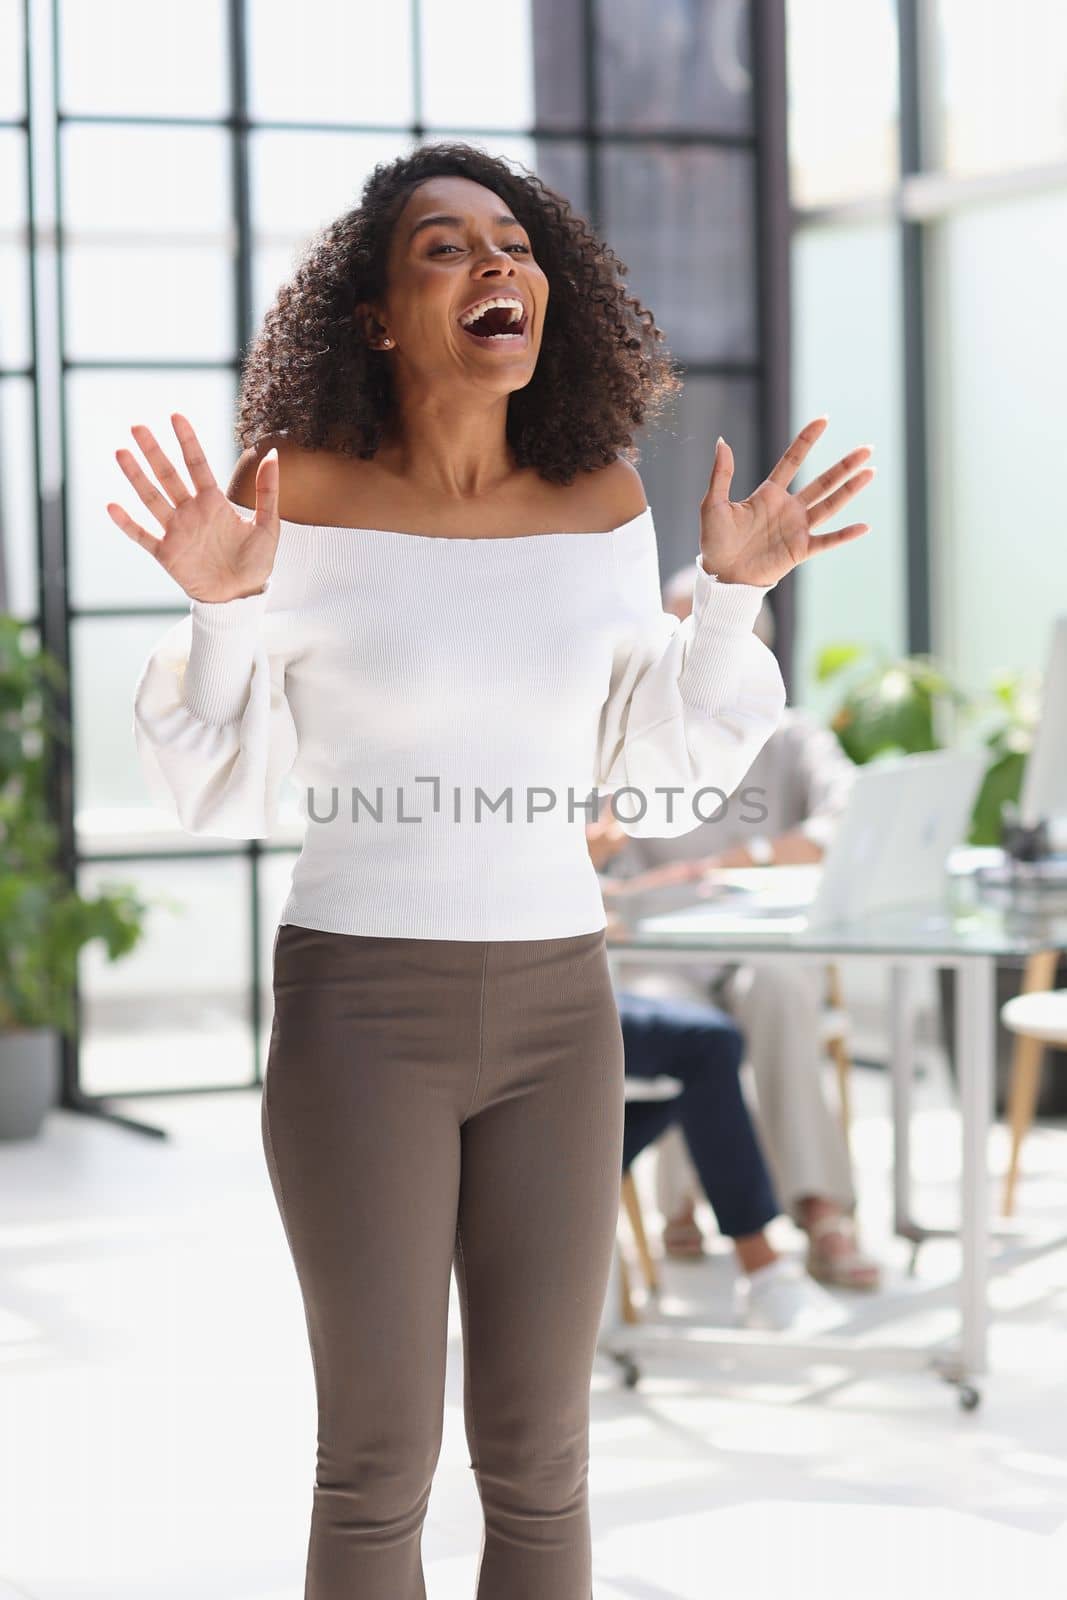 Portrait of a young attractive African American woman in the office